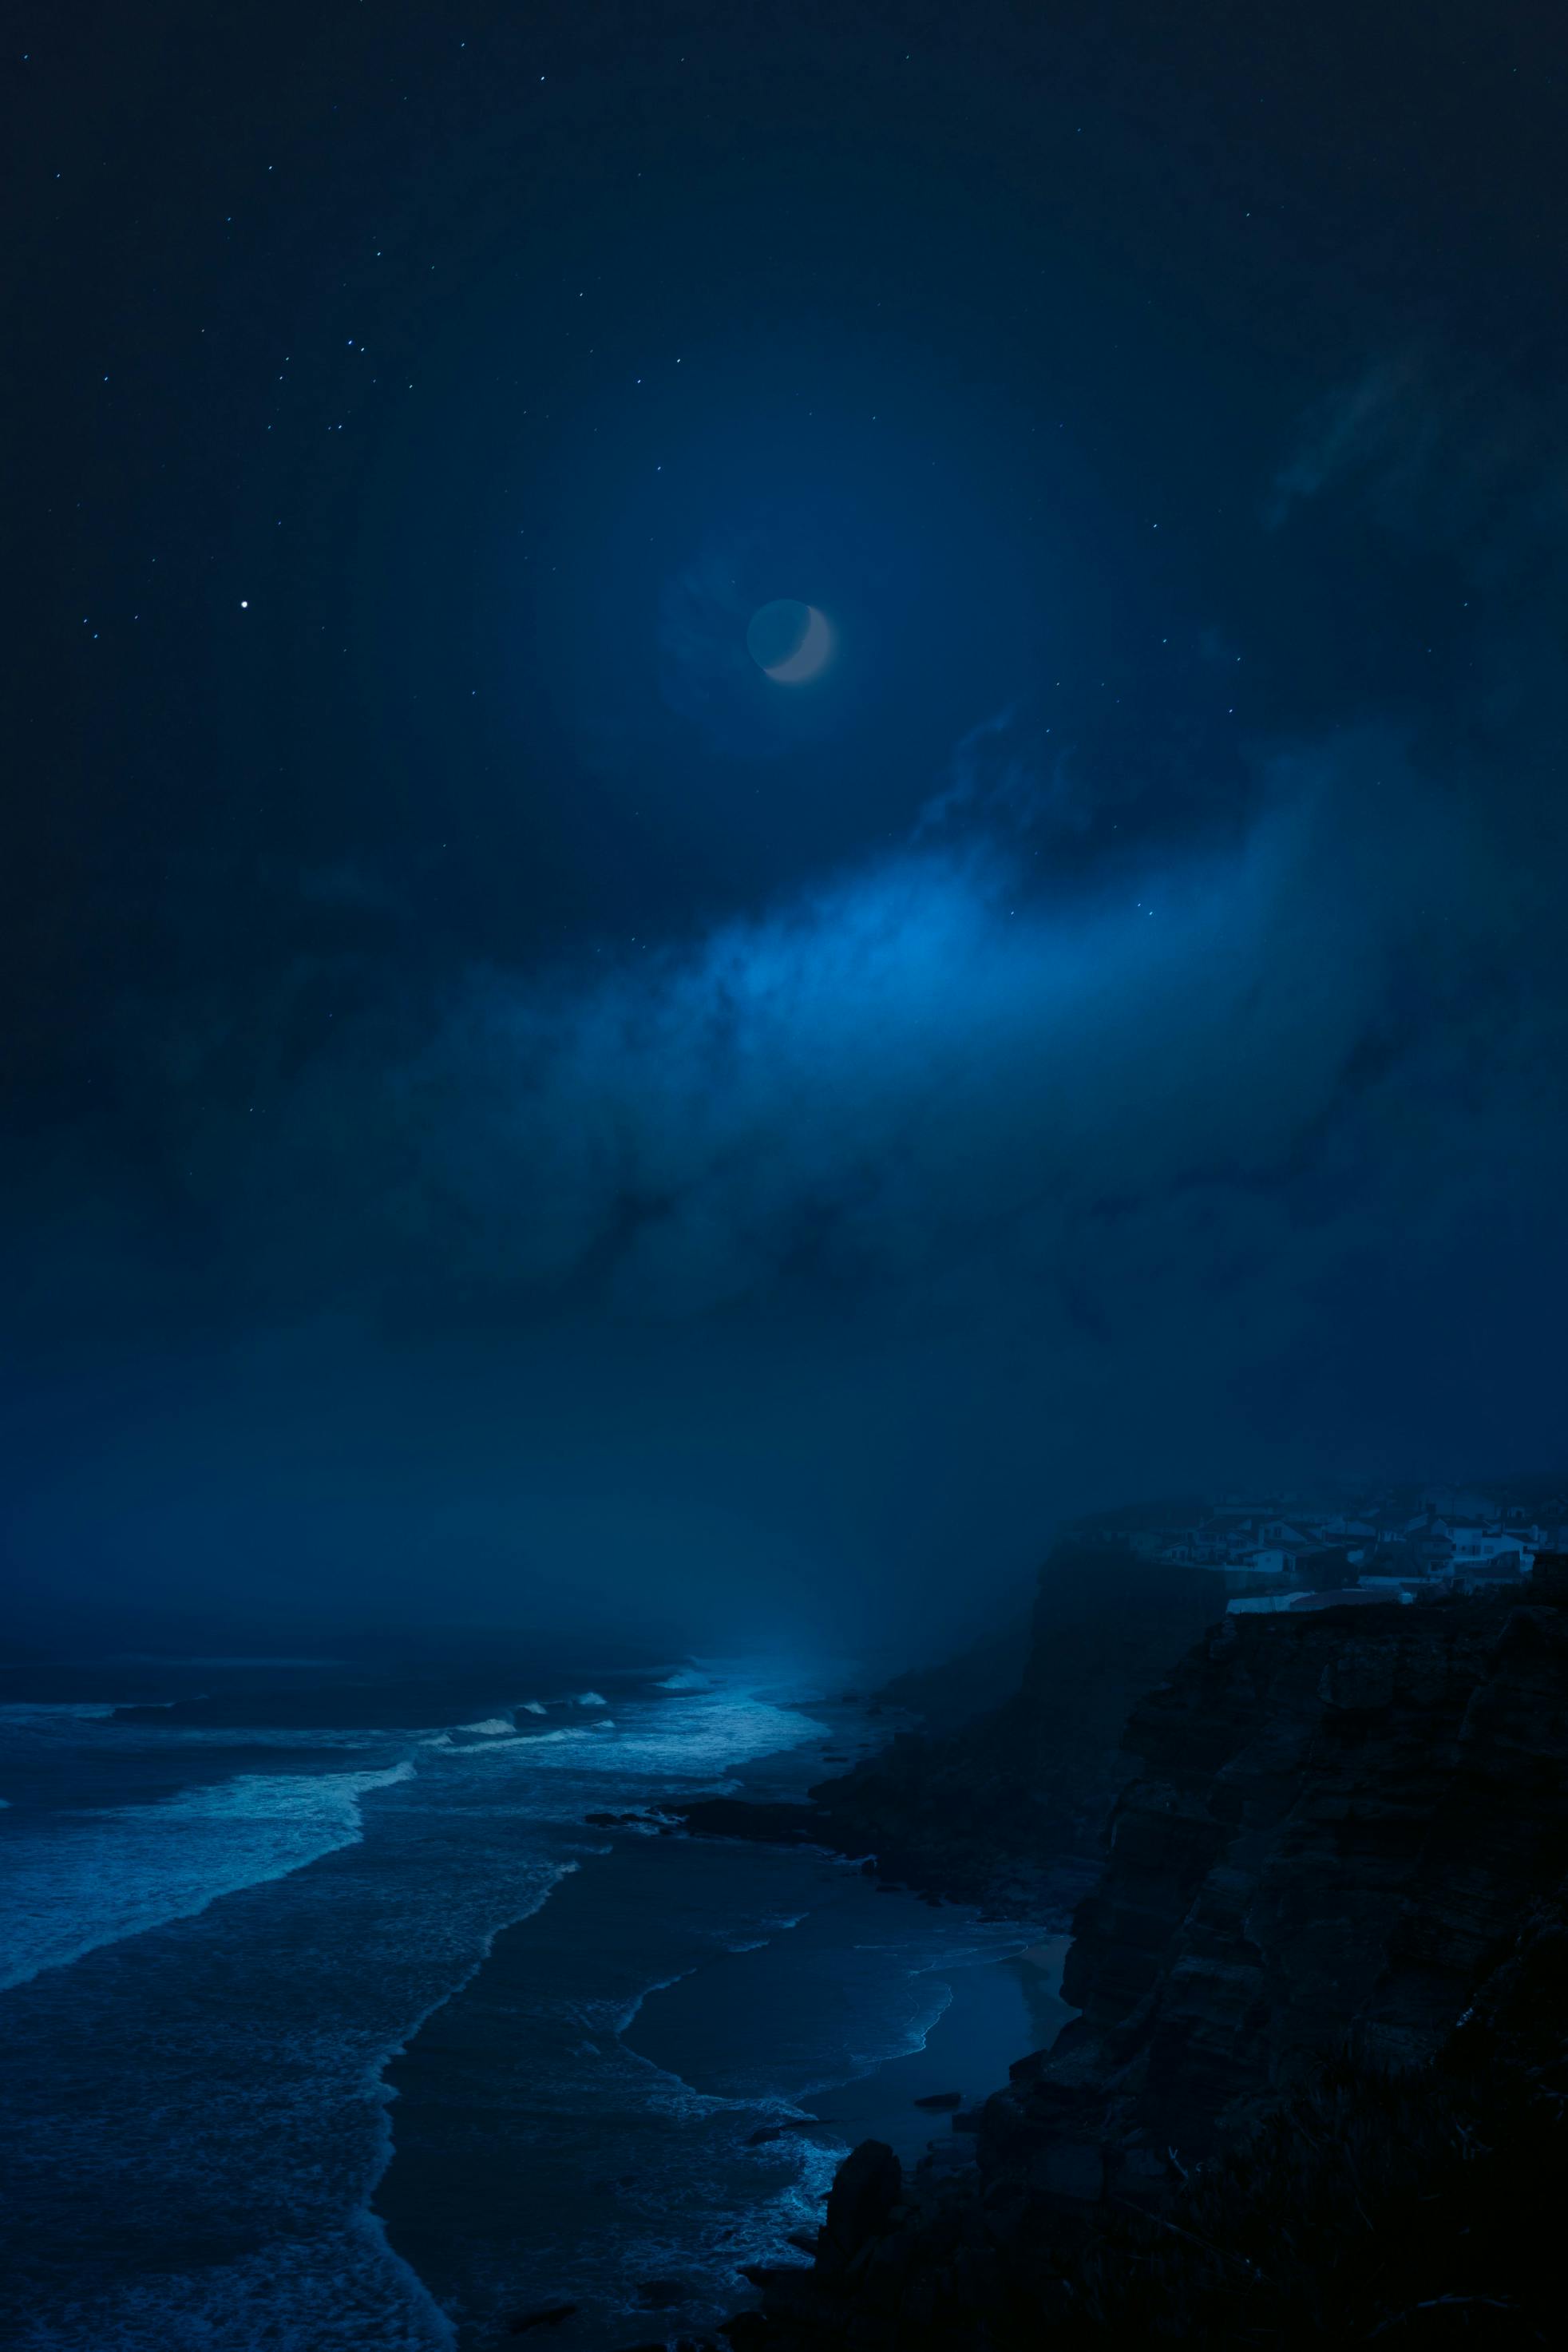 Ocean at night with a dim moon in the background